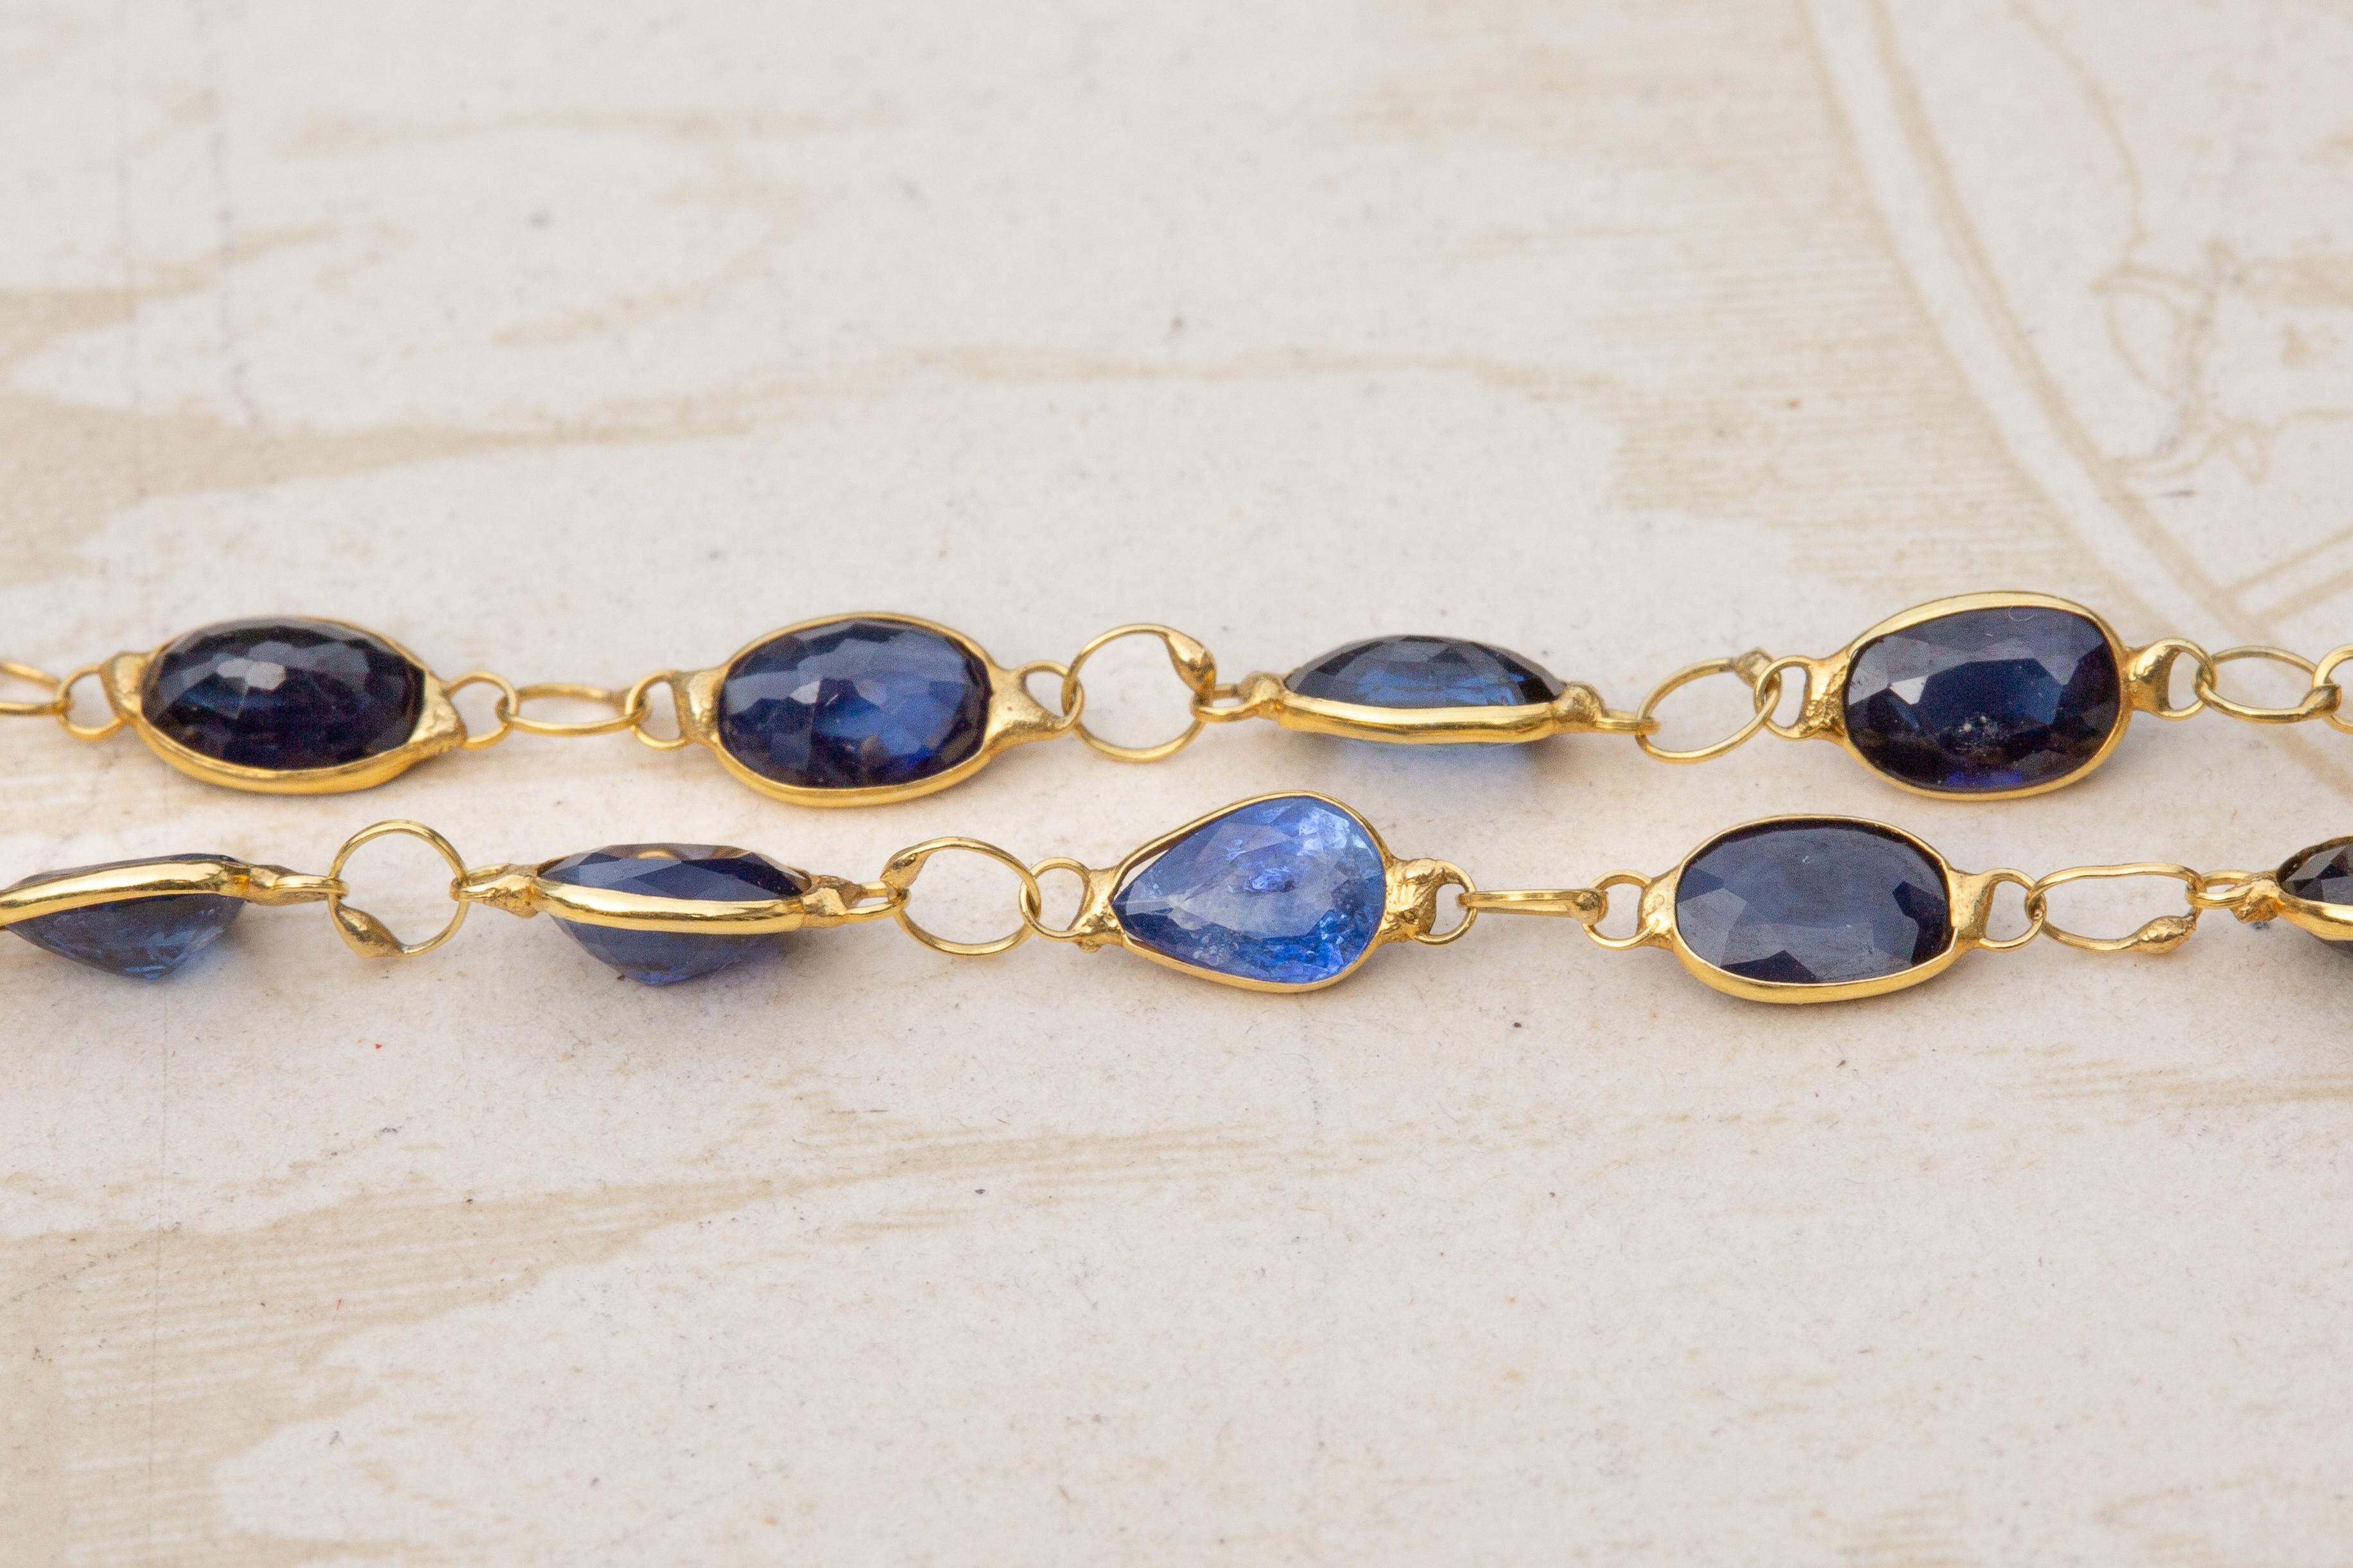 A fantastic vintage single strand sapphire necklace. The oval mixed-cut sapphires are all spectacle-set and joined by jump rings of an ouroboros shape. The ouroboros is an ancient symbol of a snake or serpent eating its own tail, signifying infinity